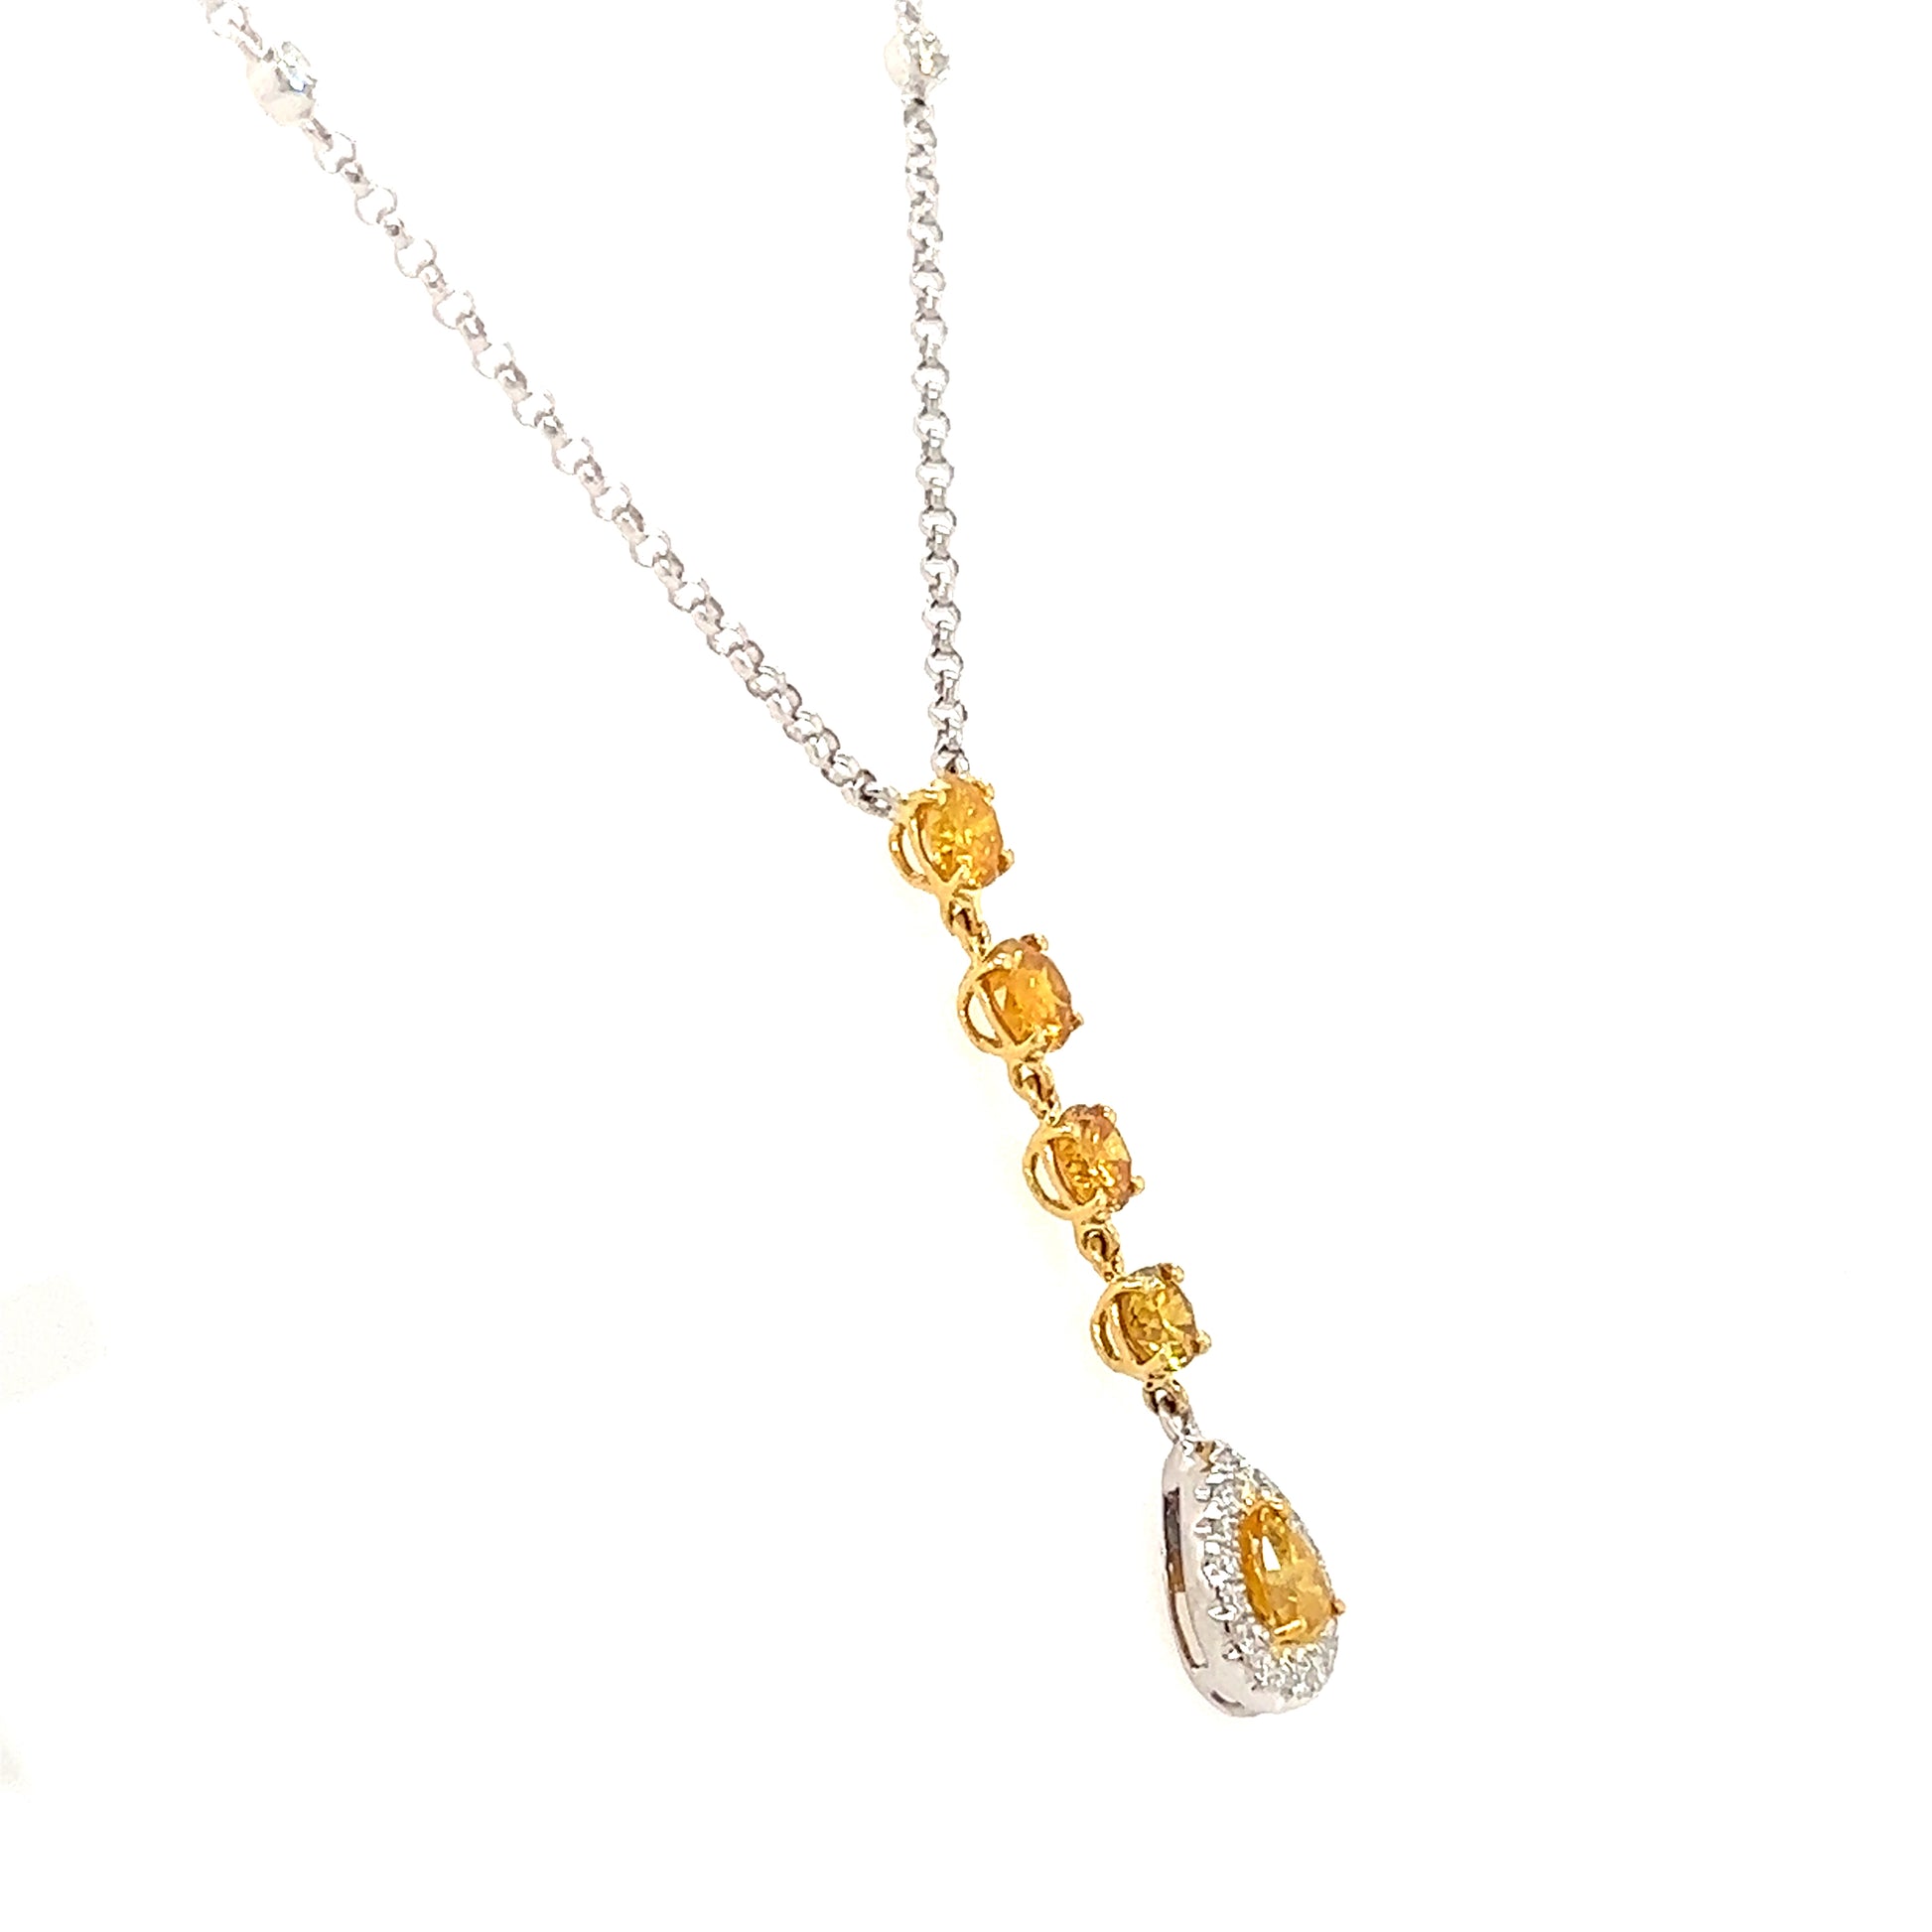 Yellow Diamond Necklace with Twenty One Diamonds in 18K White Gold Right Side View